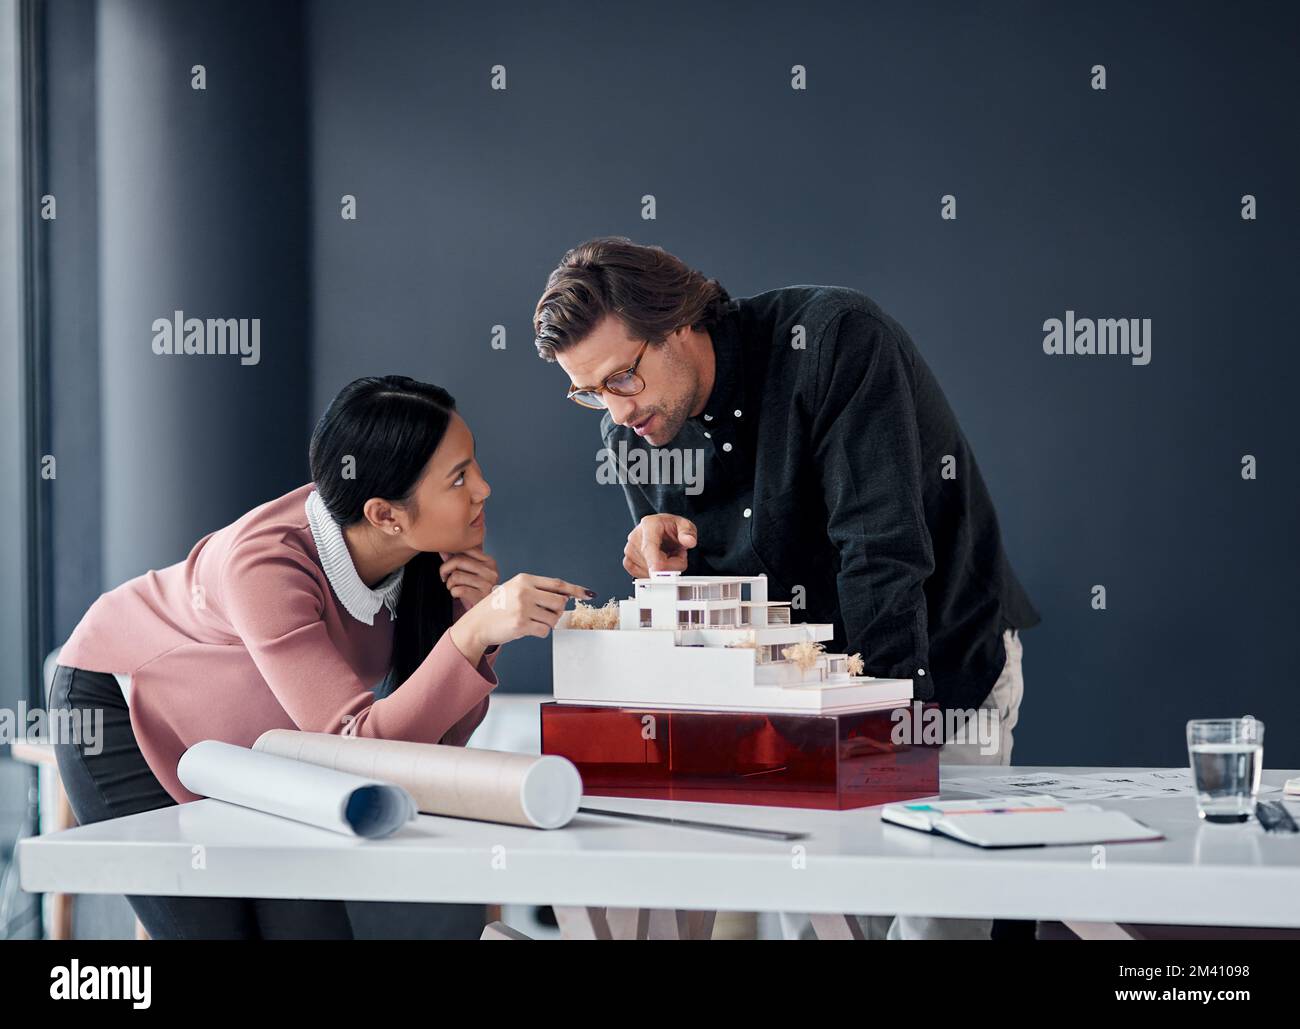 Things are coming together perfectly. two young architects working together on a scale model of a modern house in their office. Stock Photo